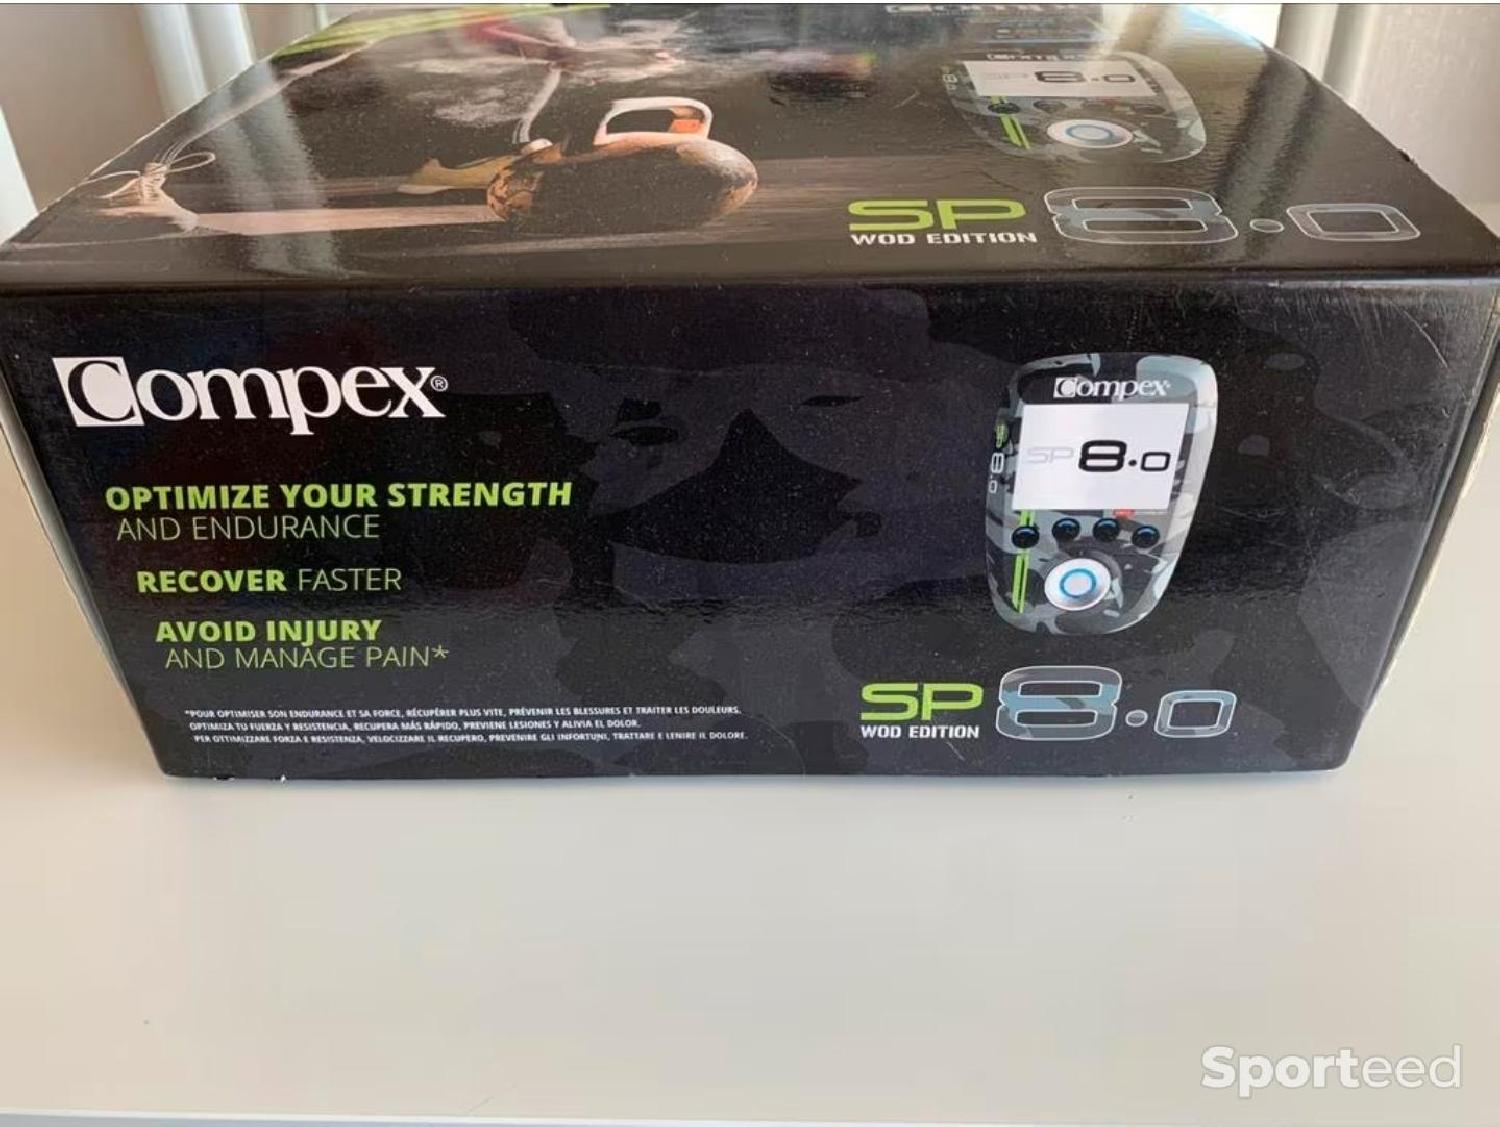 Compex France - #promo SP 8.0 WOD Edition ! 😍 👉SP8.0 WOD : http